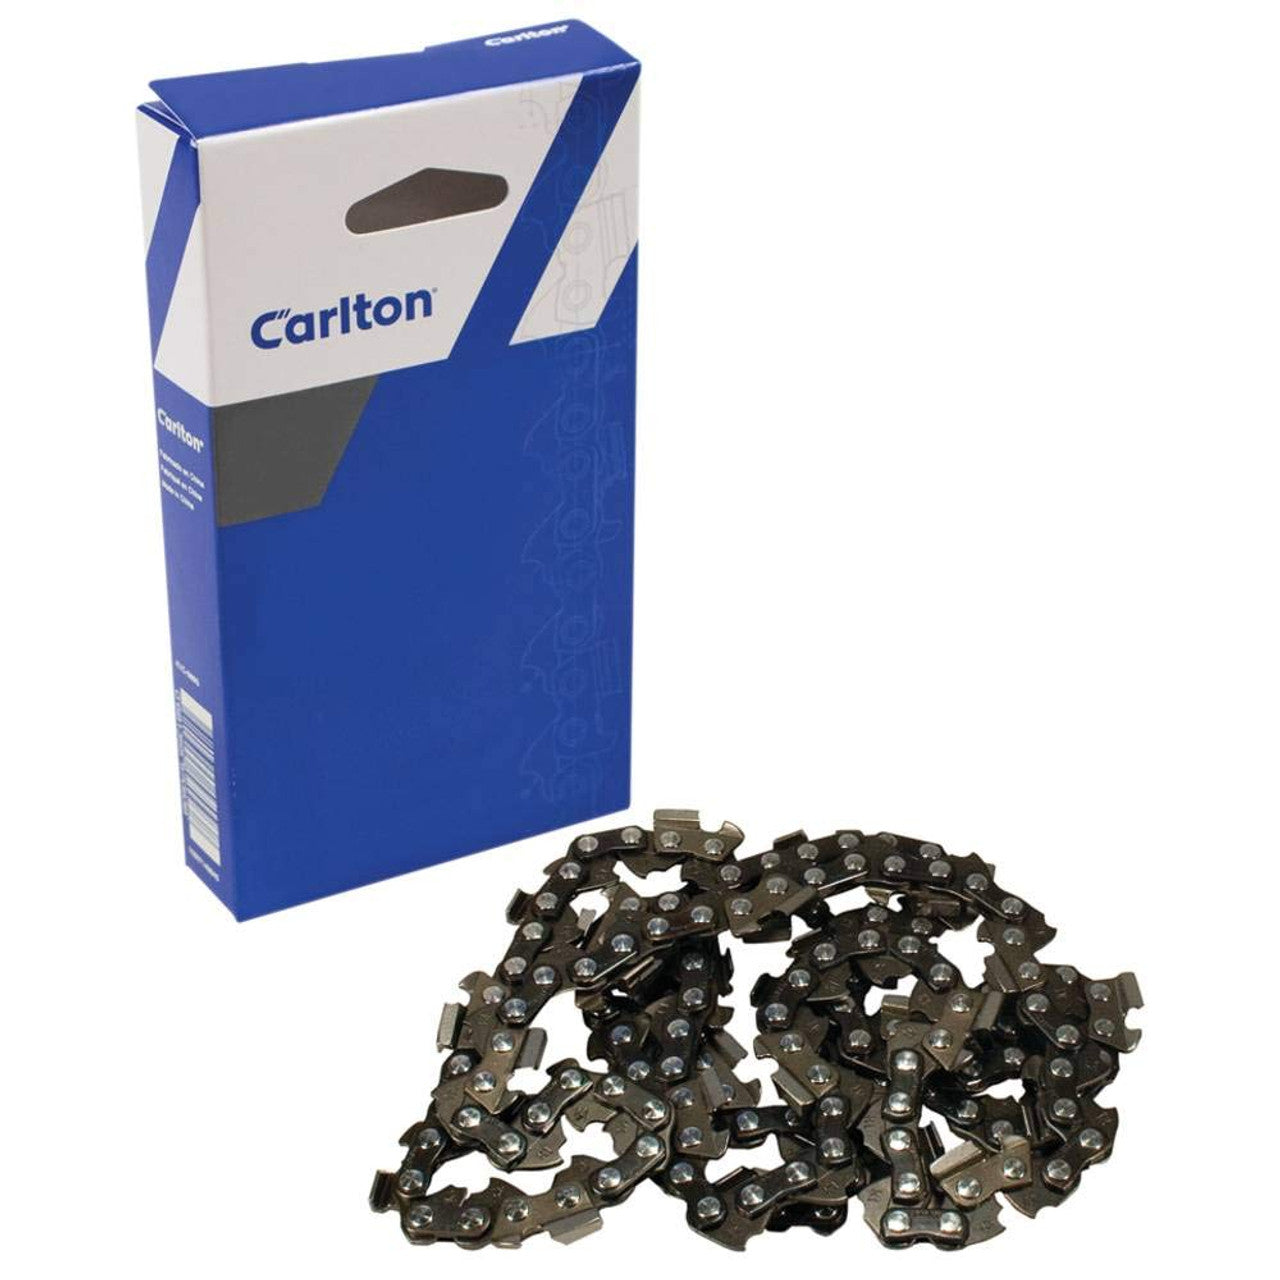 Carlton Full-Chisel Chain Saw Chain Loops - 3/8" - .050 Gauge - Non-Safety